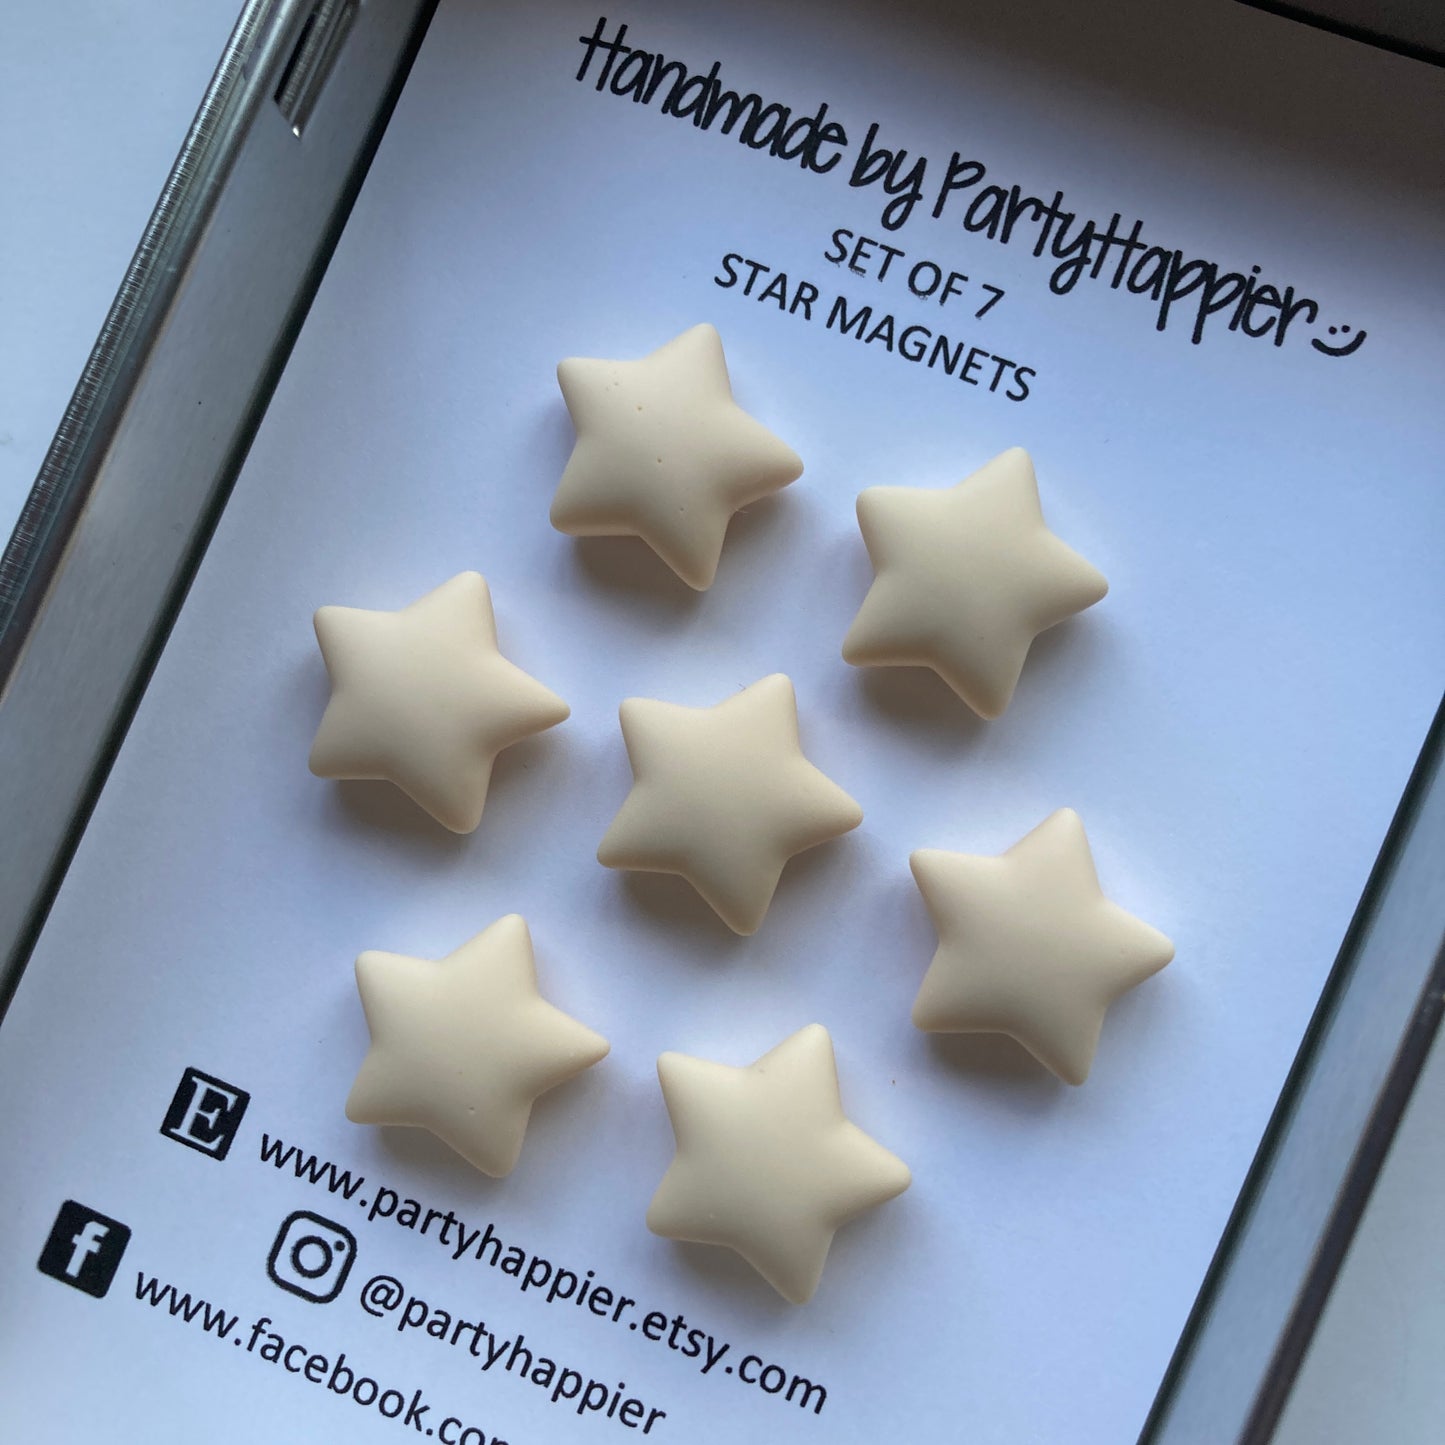 Yellow Star Magnets